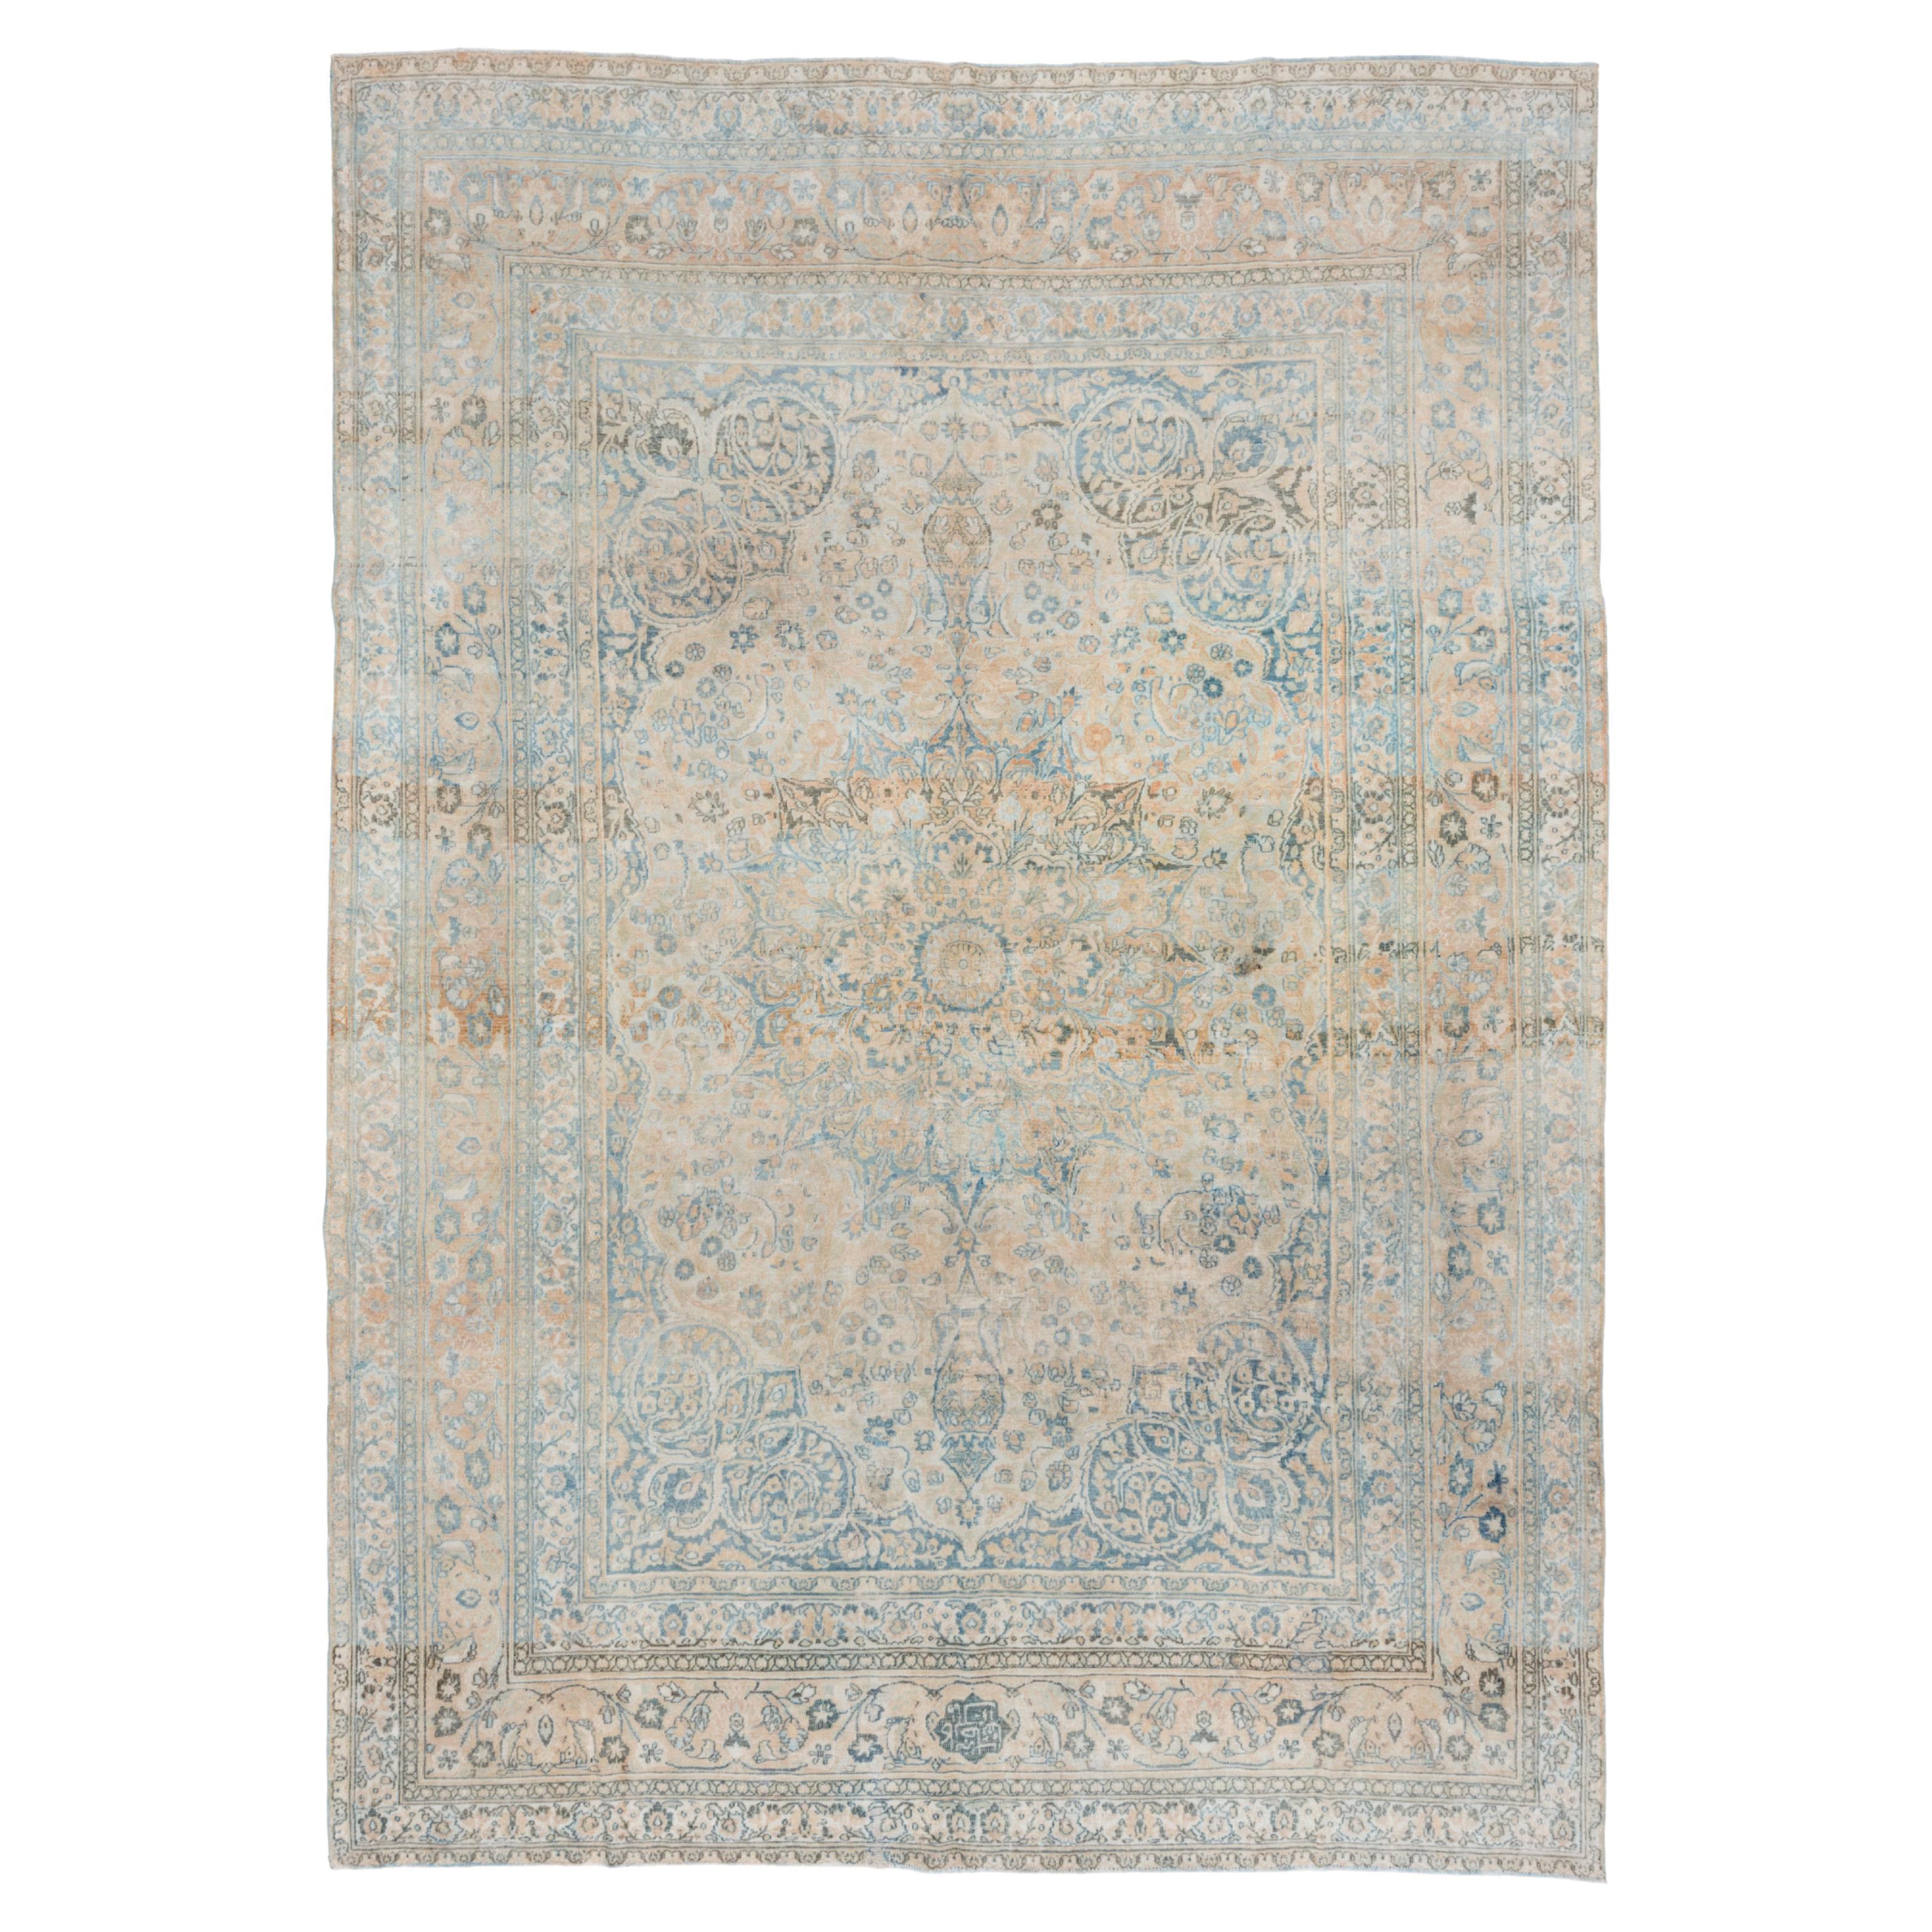 Eliko Rugs by David Ariel Antique Blue and Peach Khorassan Rug, circa 1930s For Sale